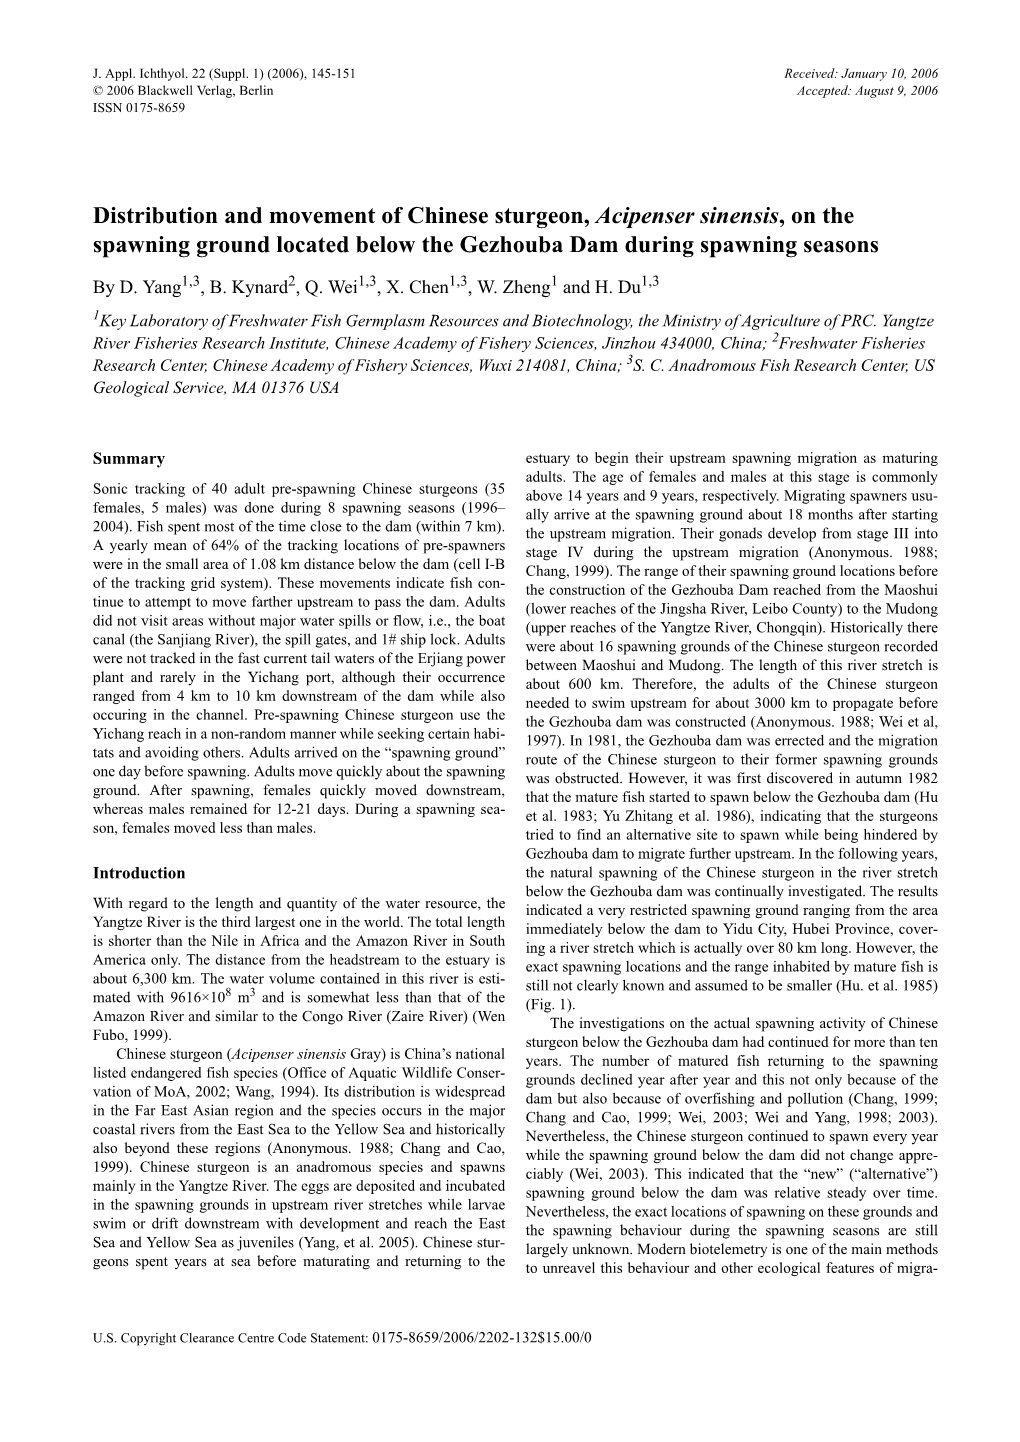 Distribution and Movement of Chinese Sturgeon, Acipenser Sinensis, on the Spawning Ground Located Below the Gezhouba Dam During Spawning Seasons